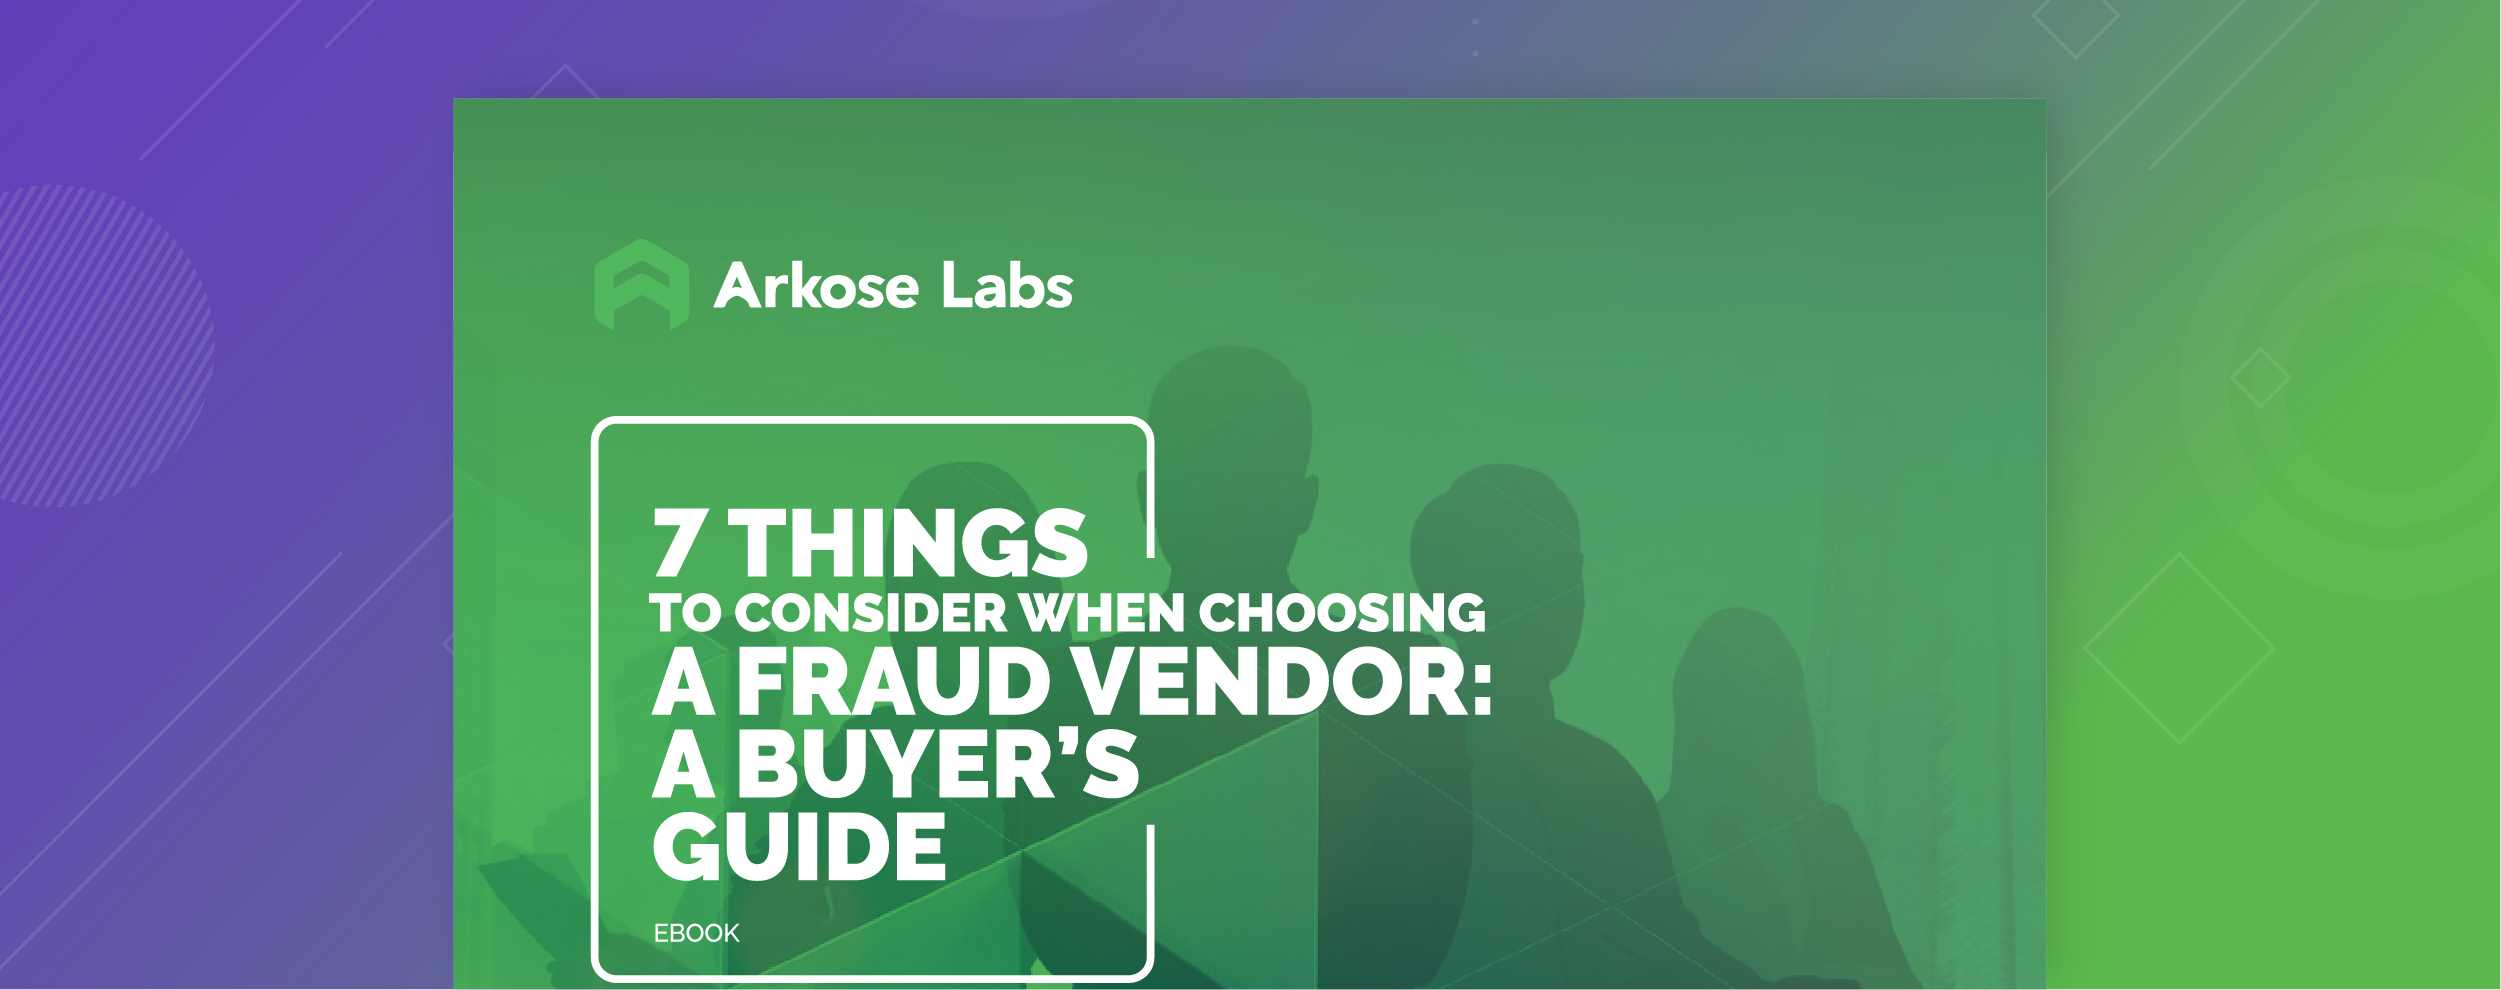 7 Things to Consider When Choosing a Fraud Vendor: A Buyer's Guide ebook